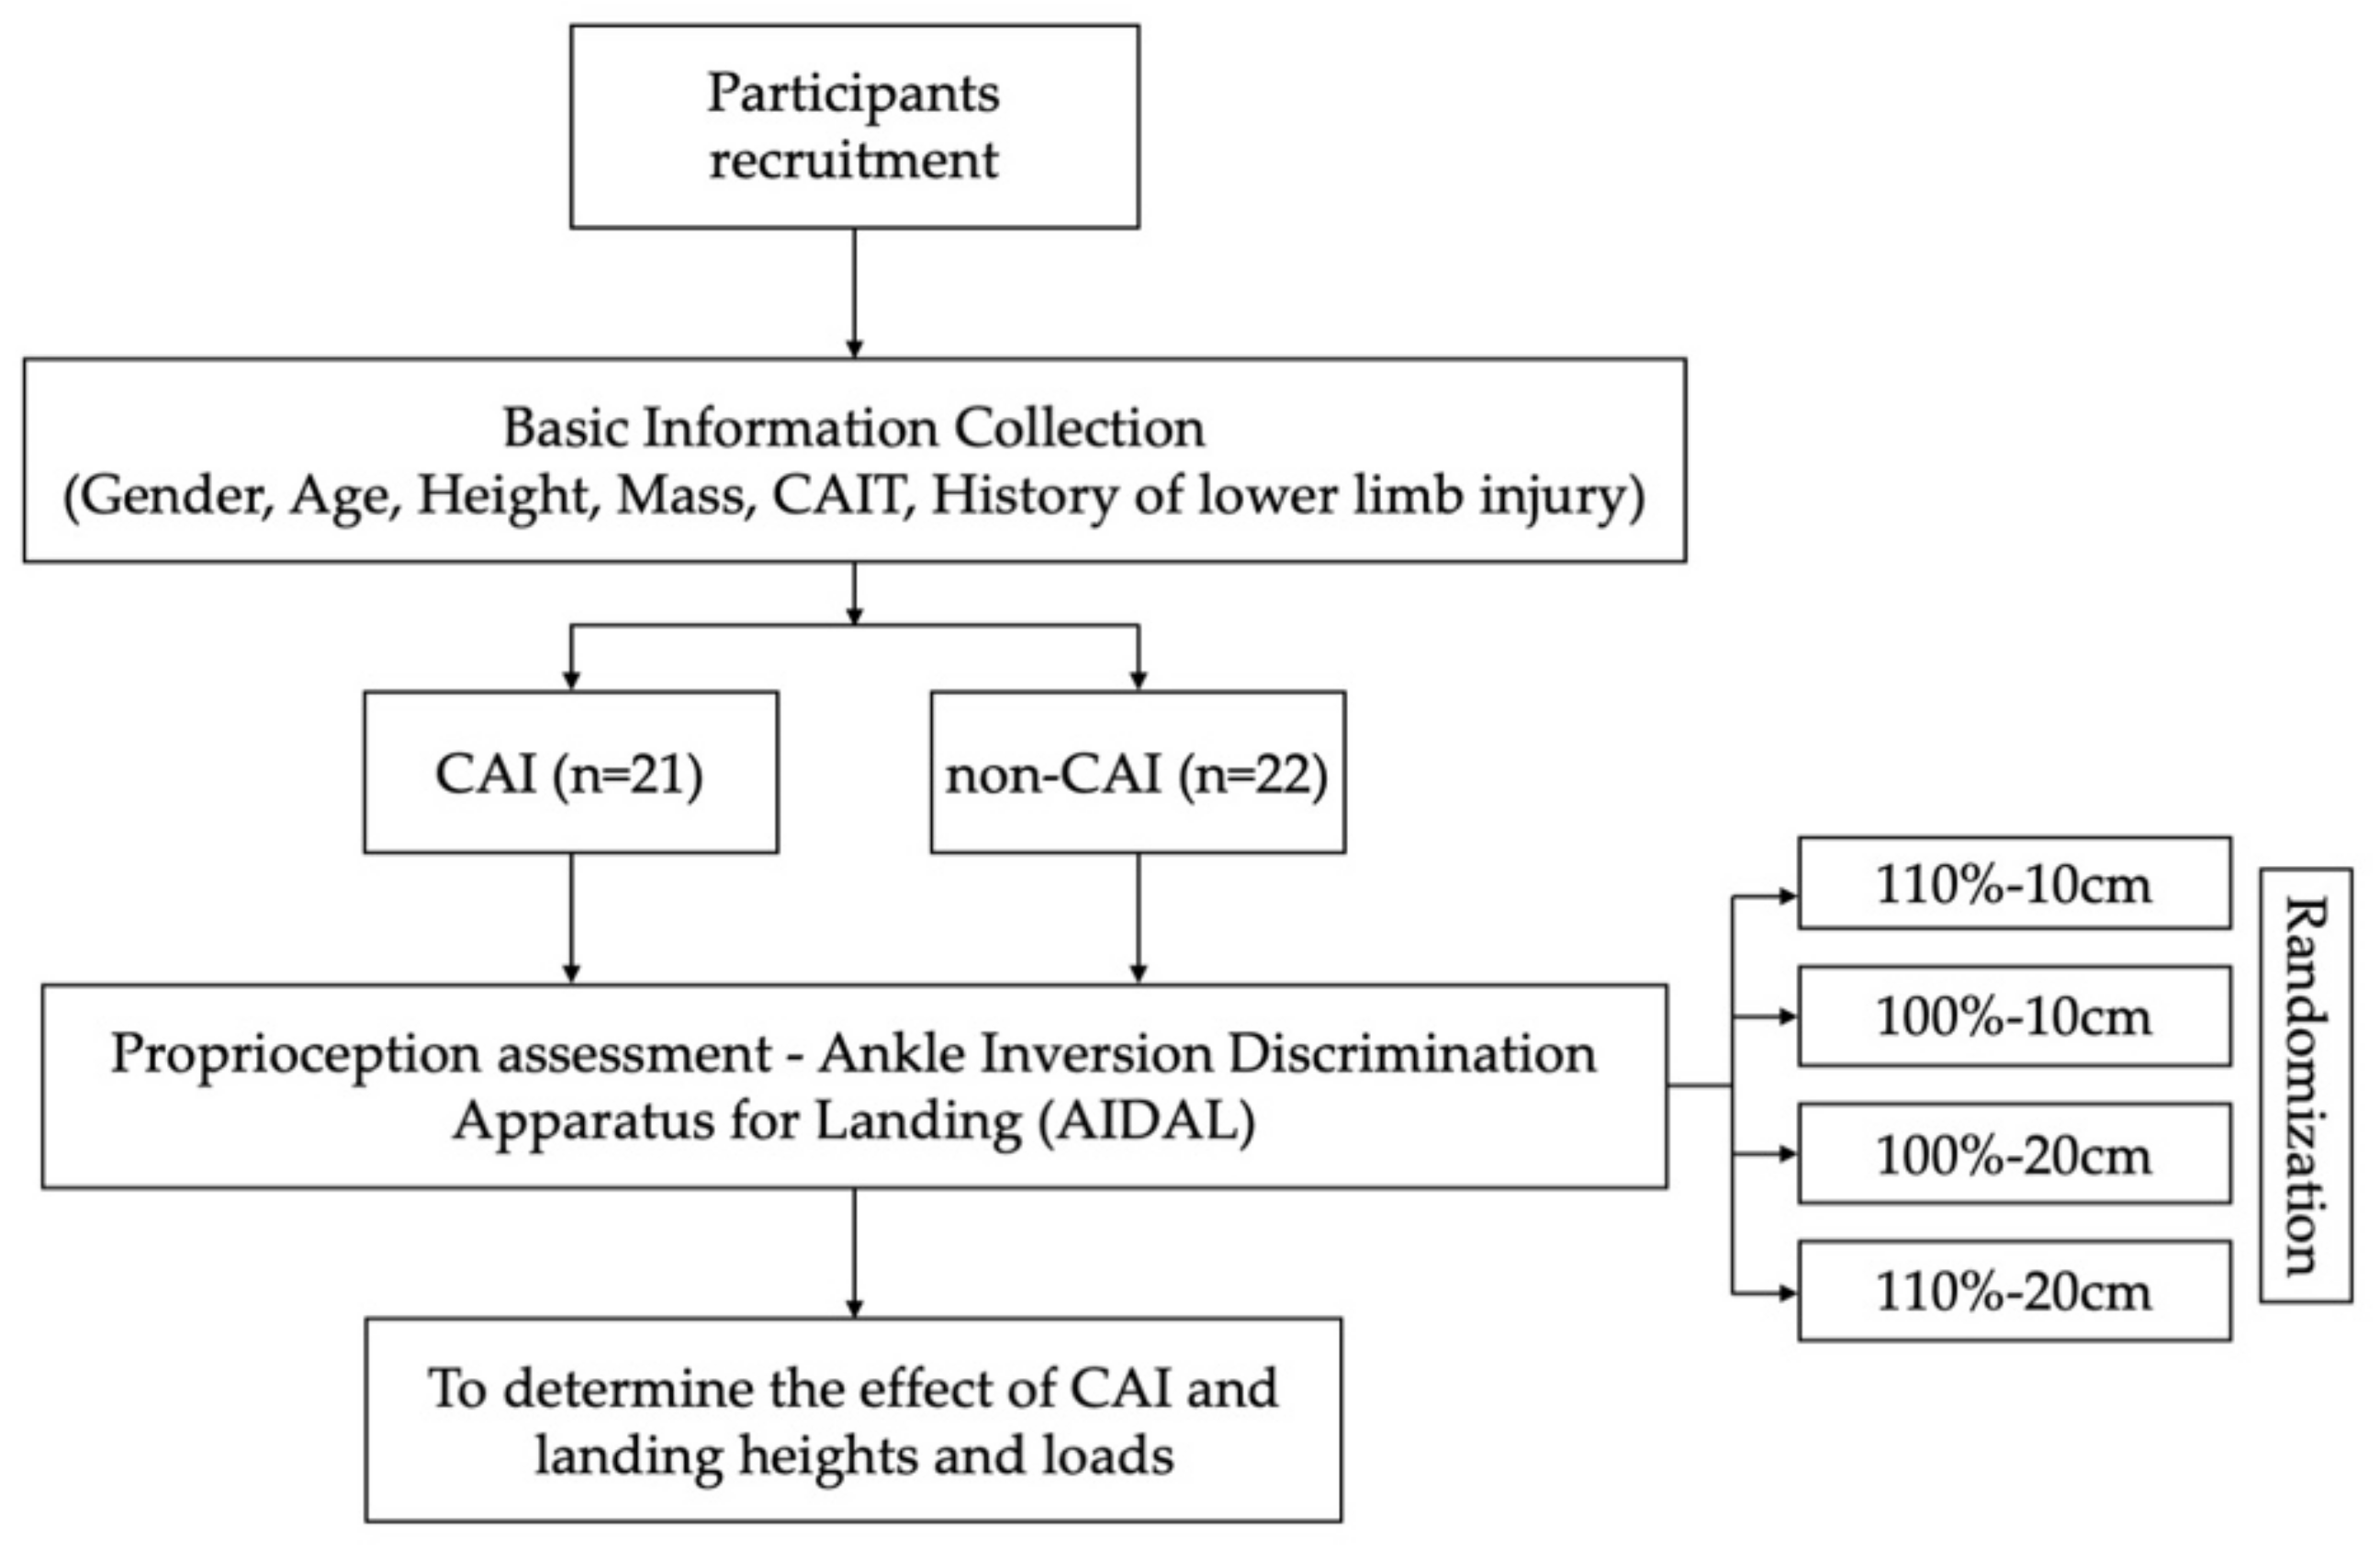 The concurrent validity and reliability of the Leg Motion system for  measuring ankle dorsiflexion range of motion in older adults [PeerJ]